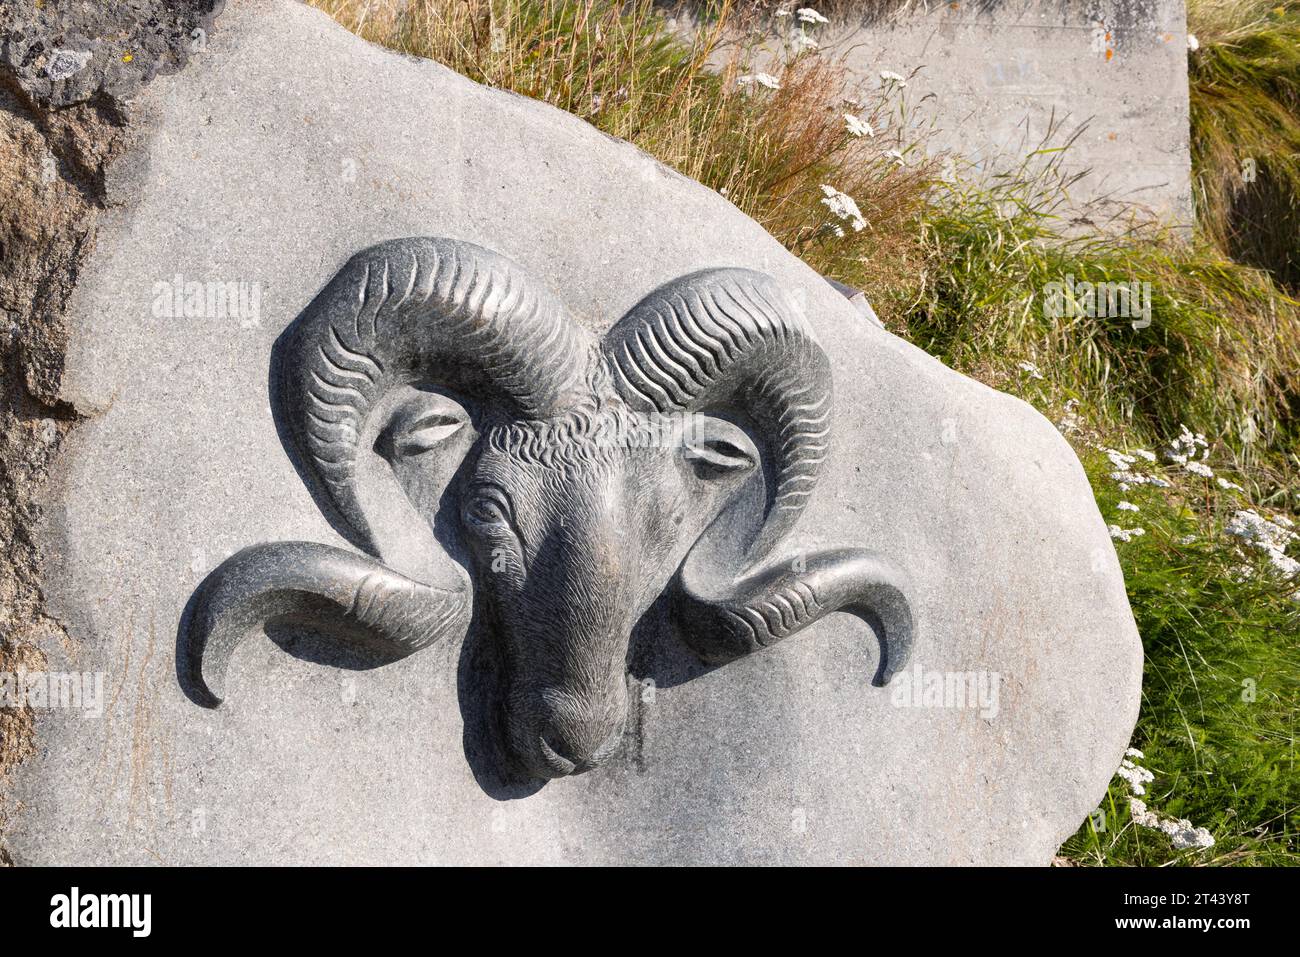 Traditional inuit sculpture; Ram's head, part of the outdoor 'Stone and man' open air gallery of stone sculptures, Qaqortoq, Greenland Arctic Stock Photo